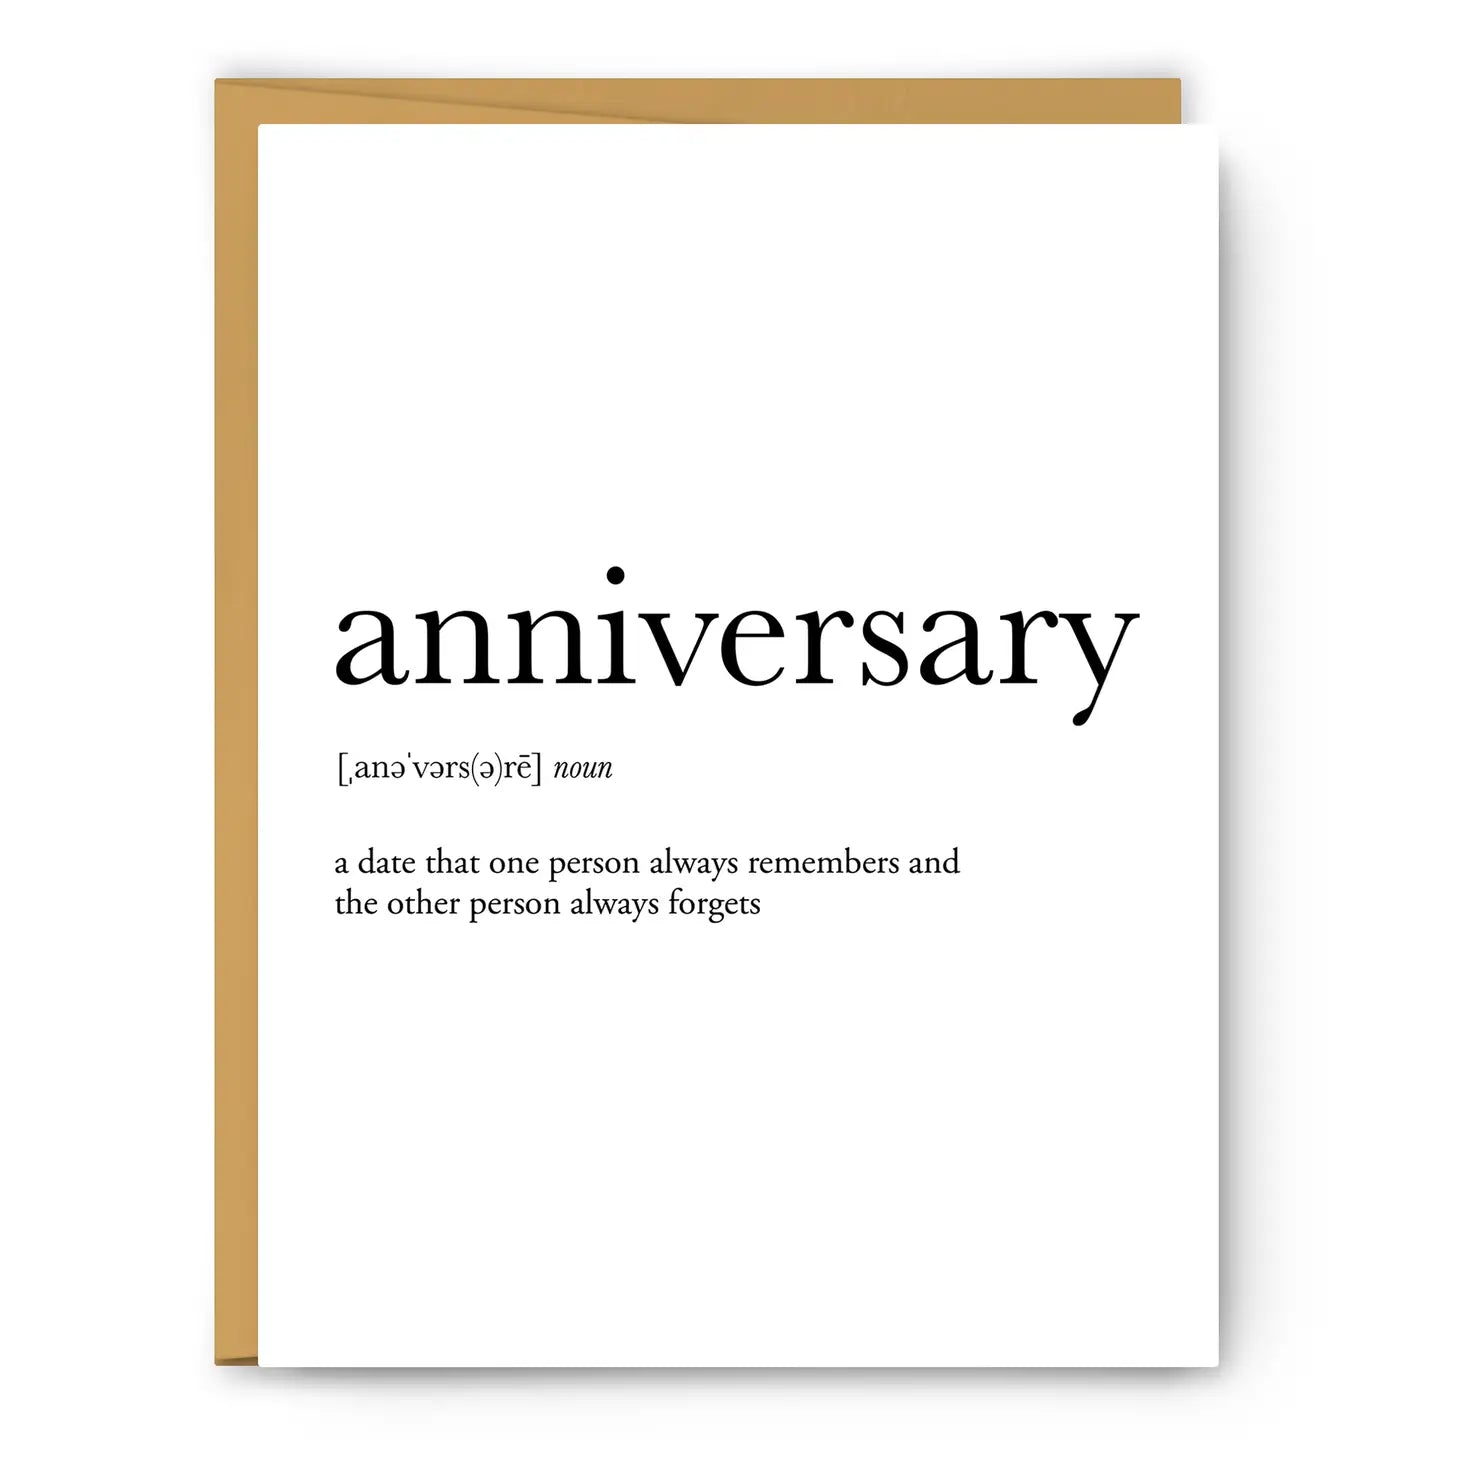 Definition Greeting Card: Anniversary